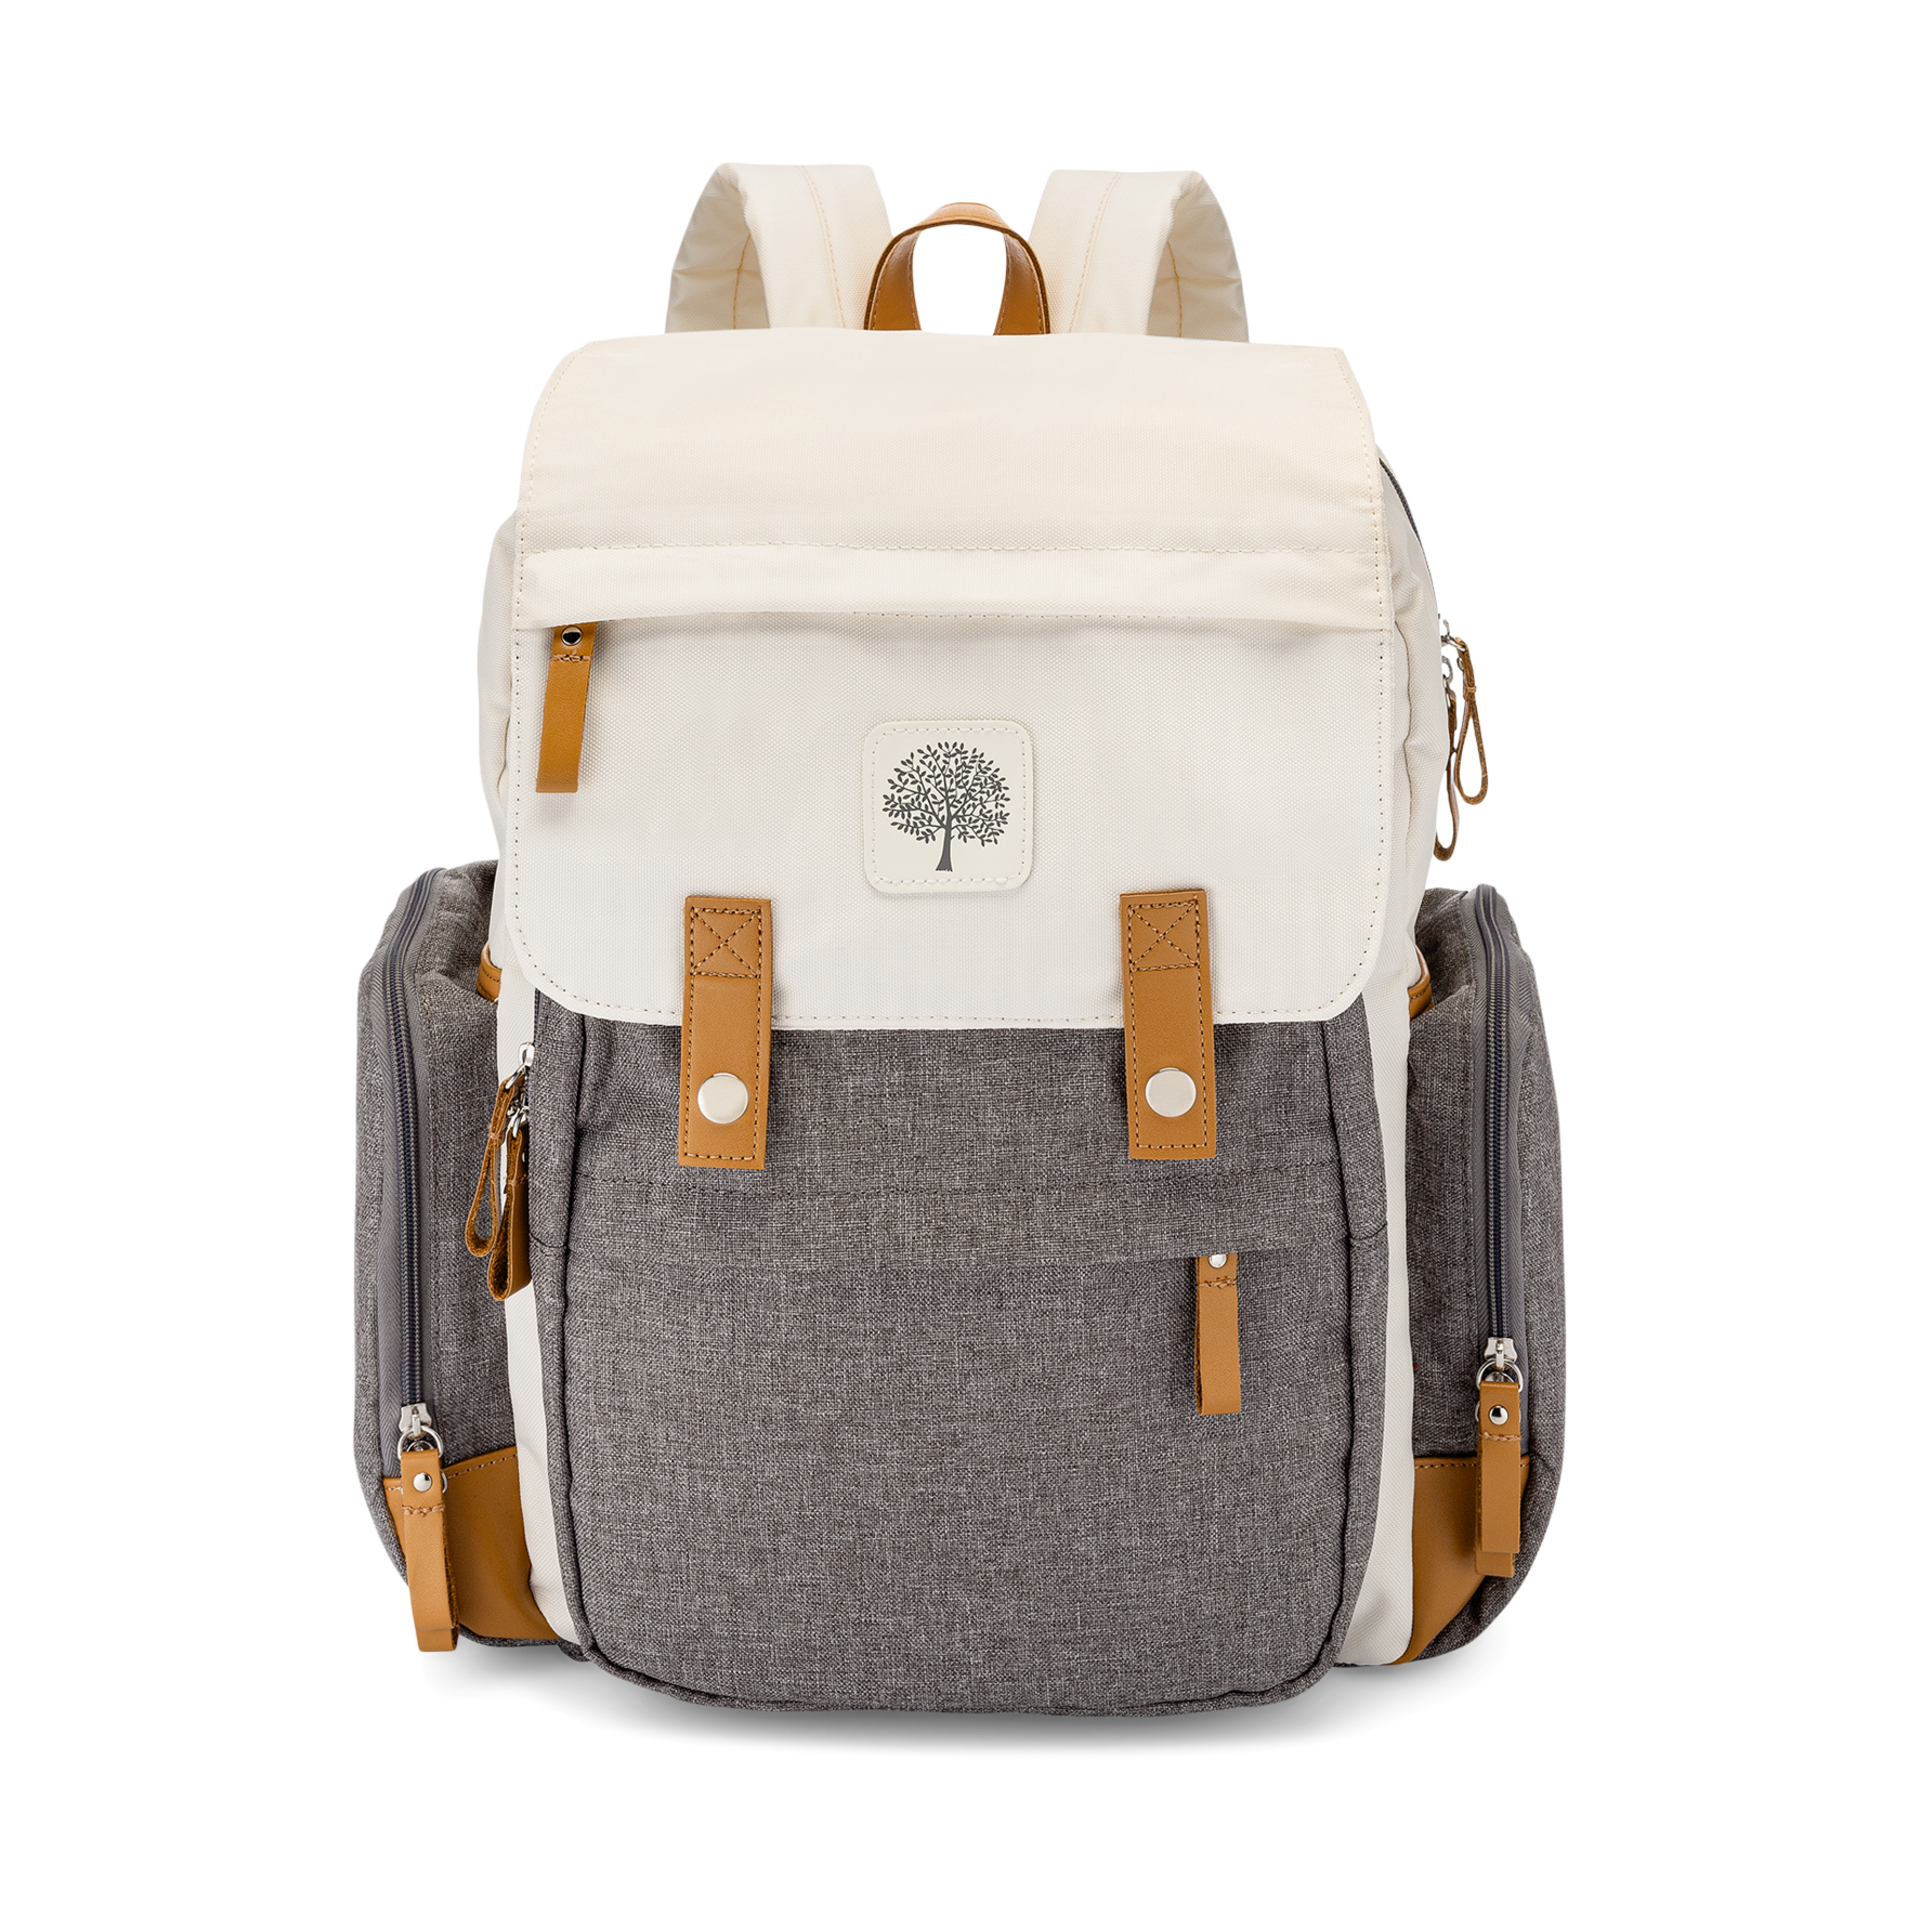 9 Best Unisex Diaper Bags for Mom and Dad | Backpackies